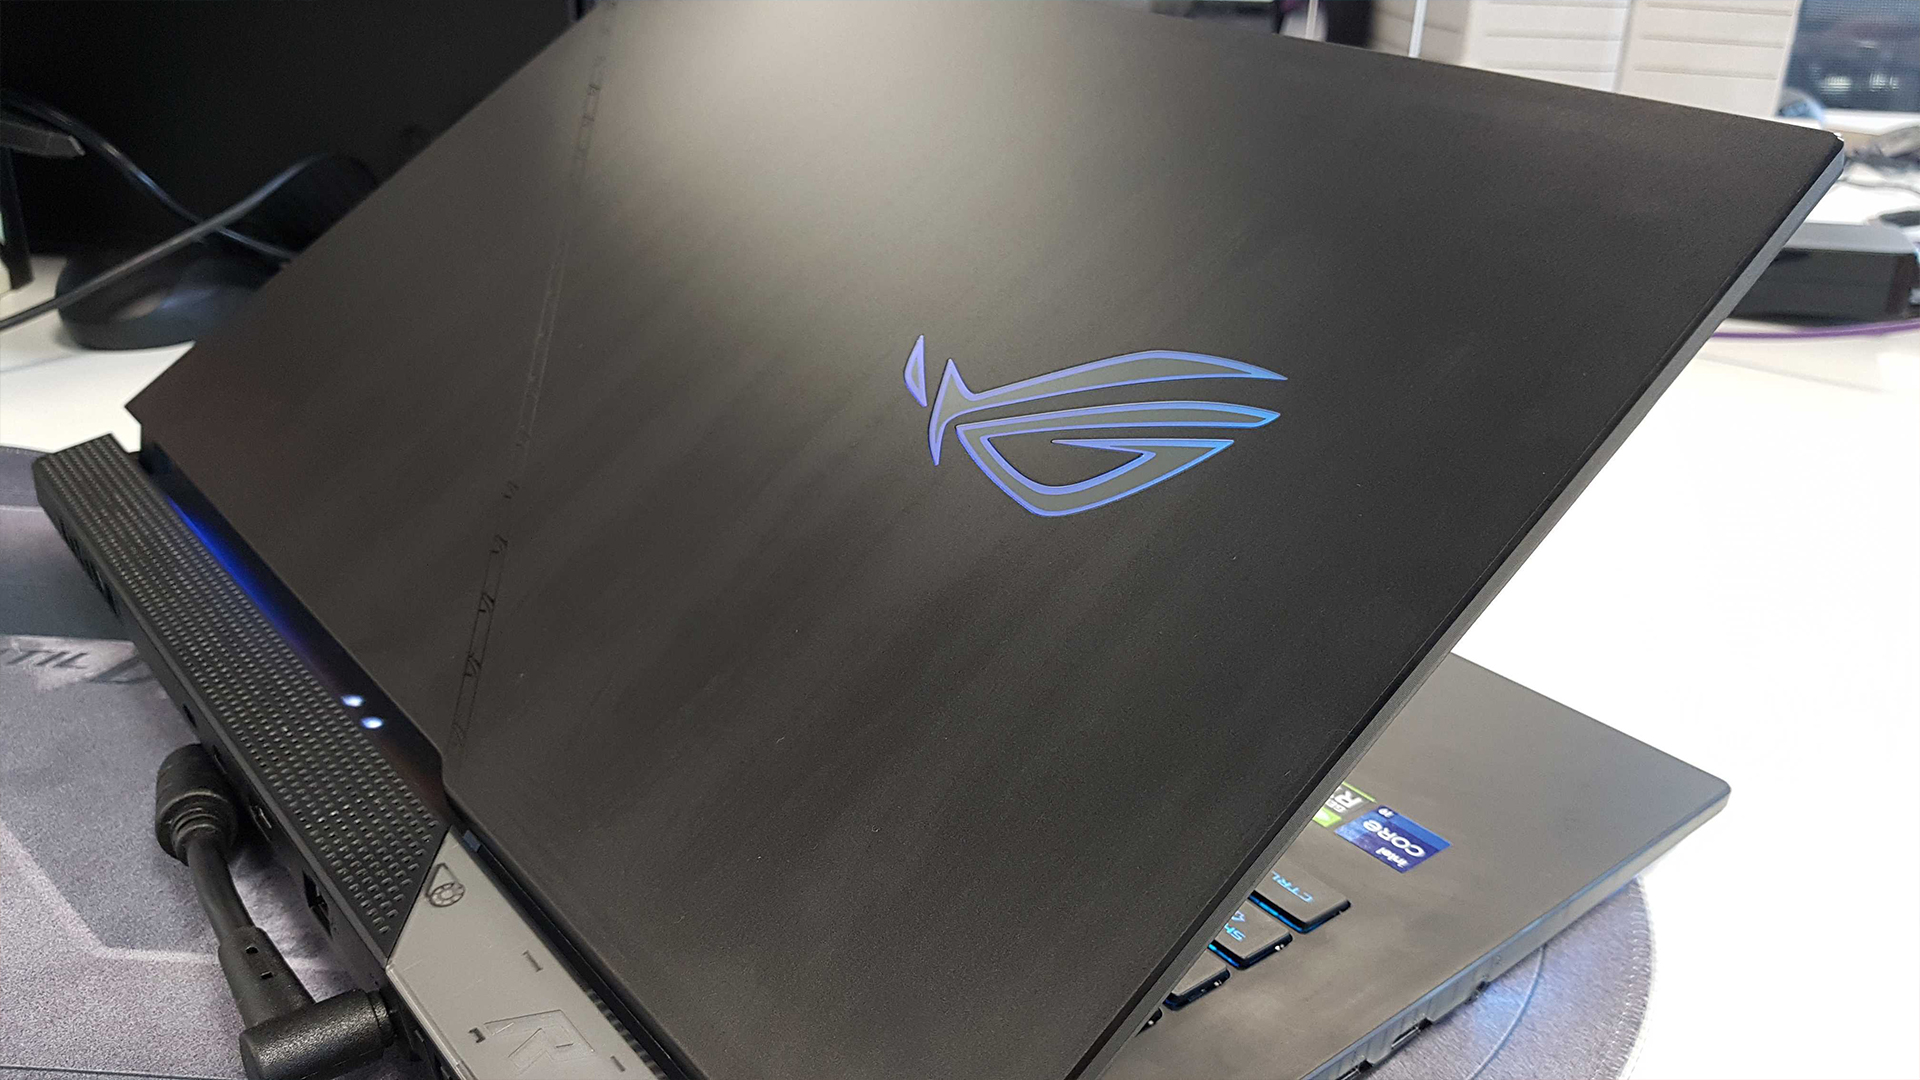 The Asus ROG Strix Scar 17 (2022) from the back on a desk.